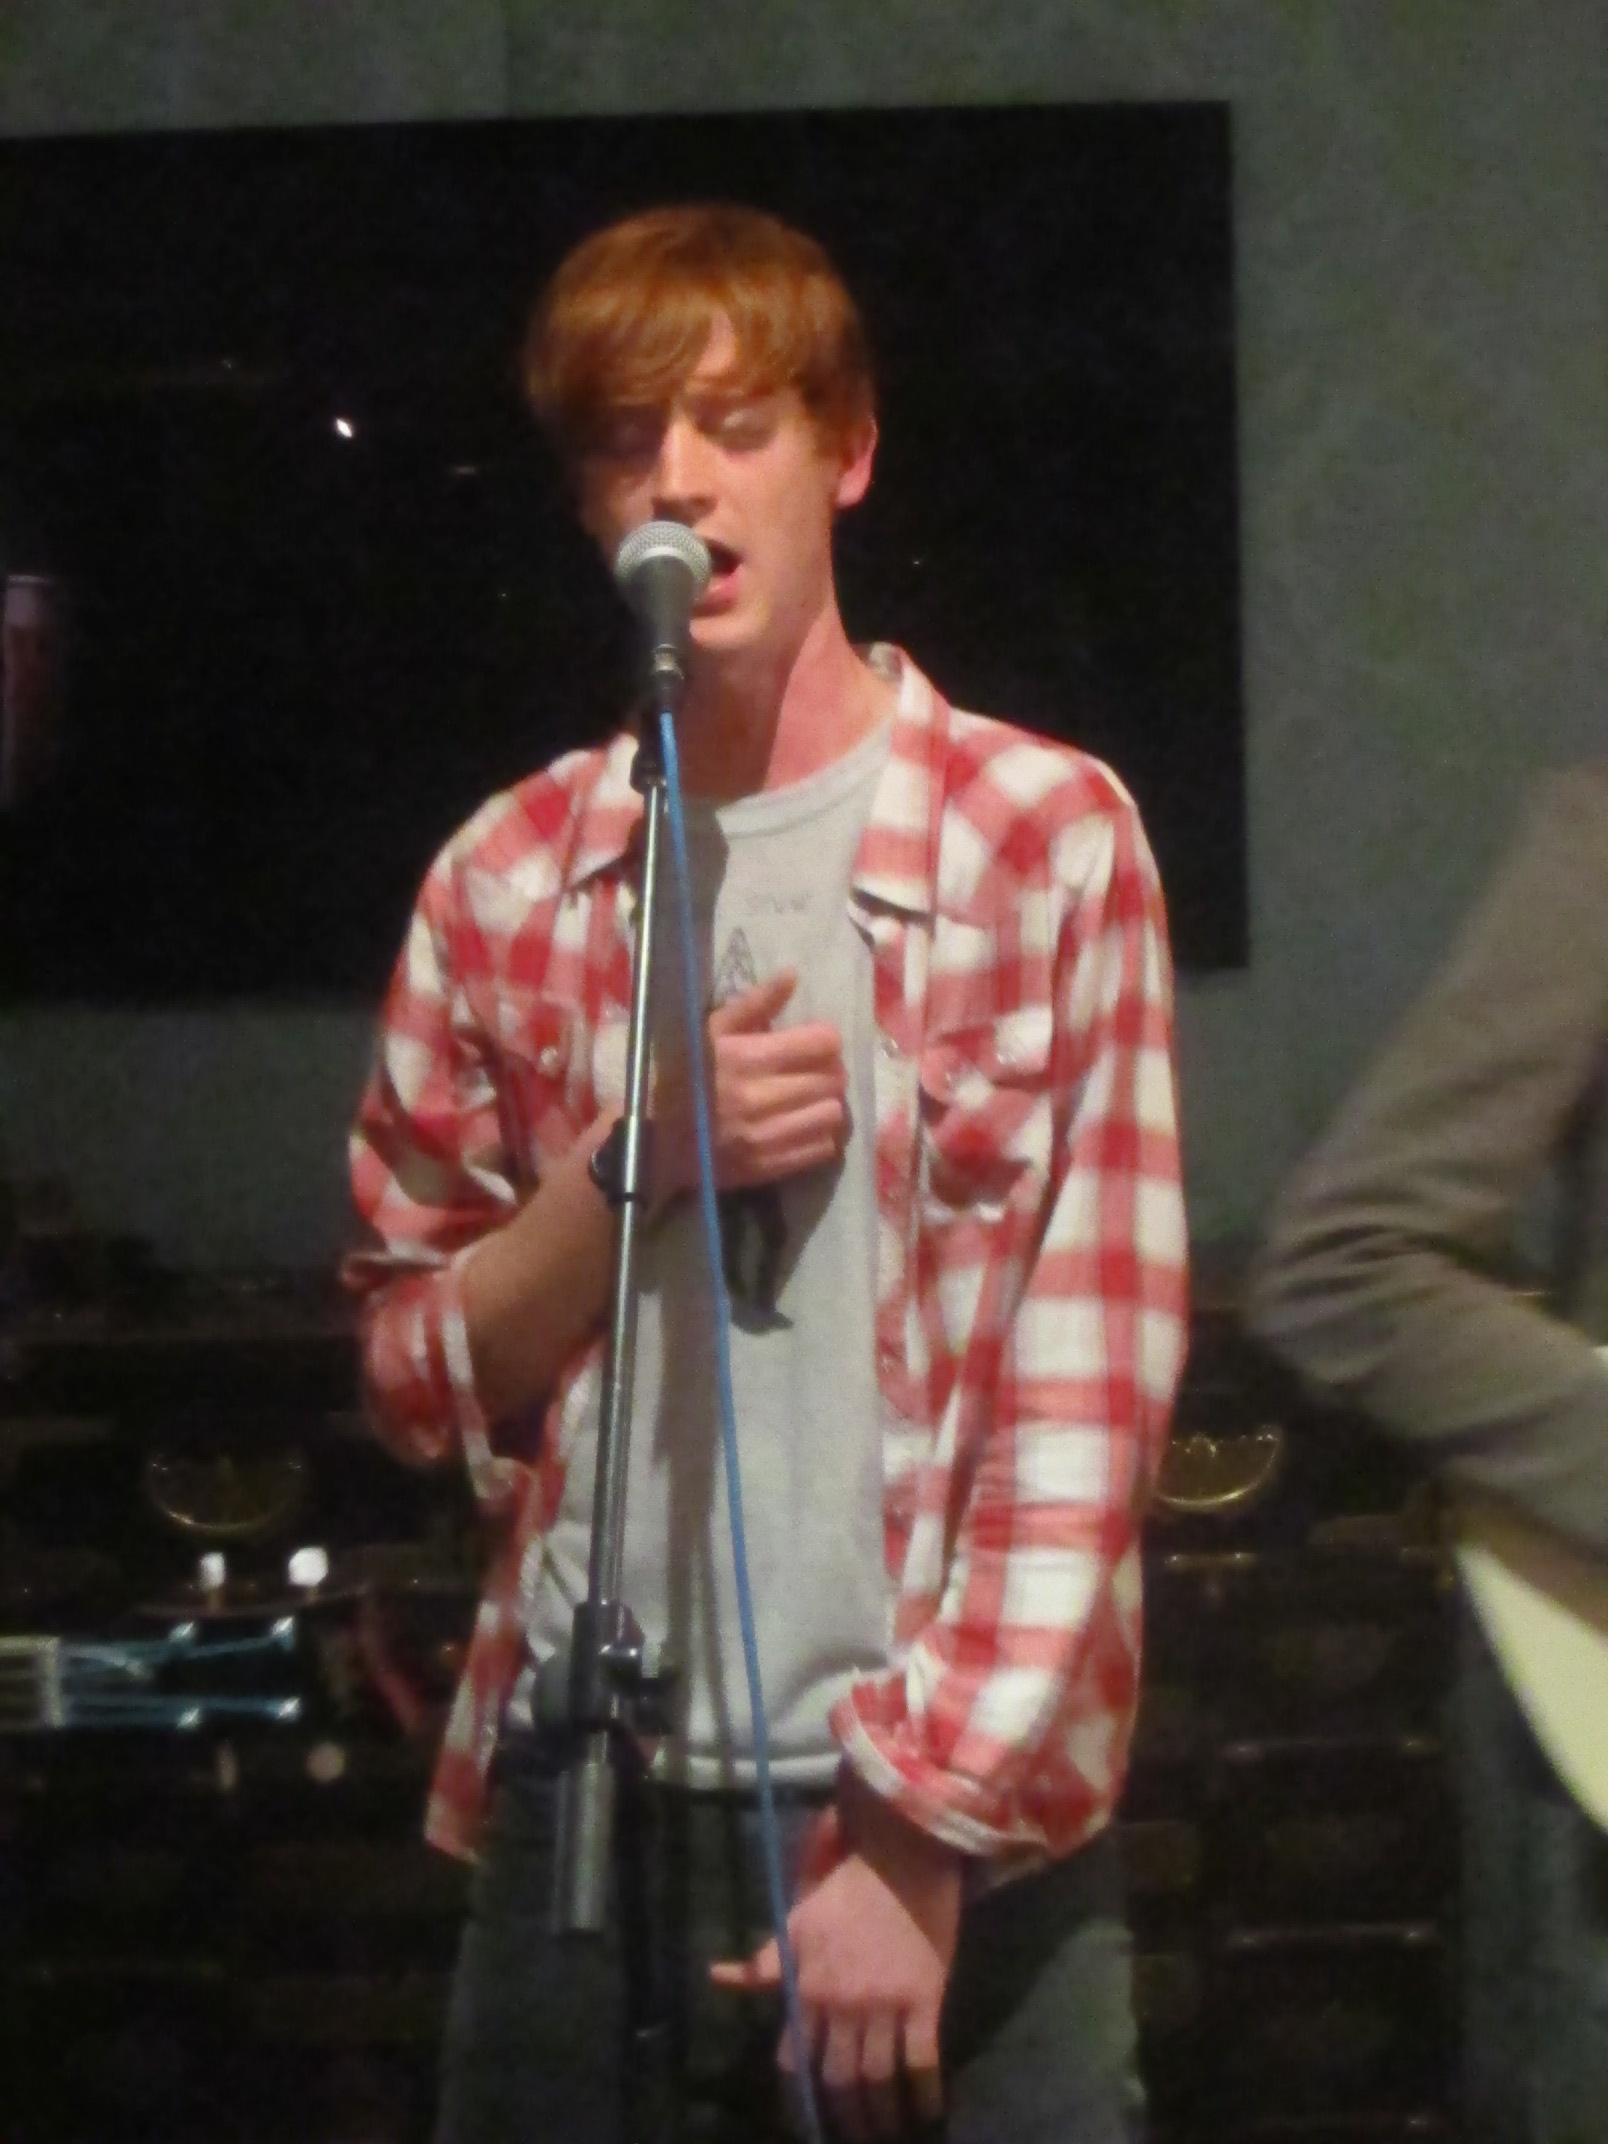 the young man is singing into a microphone